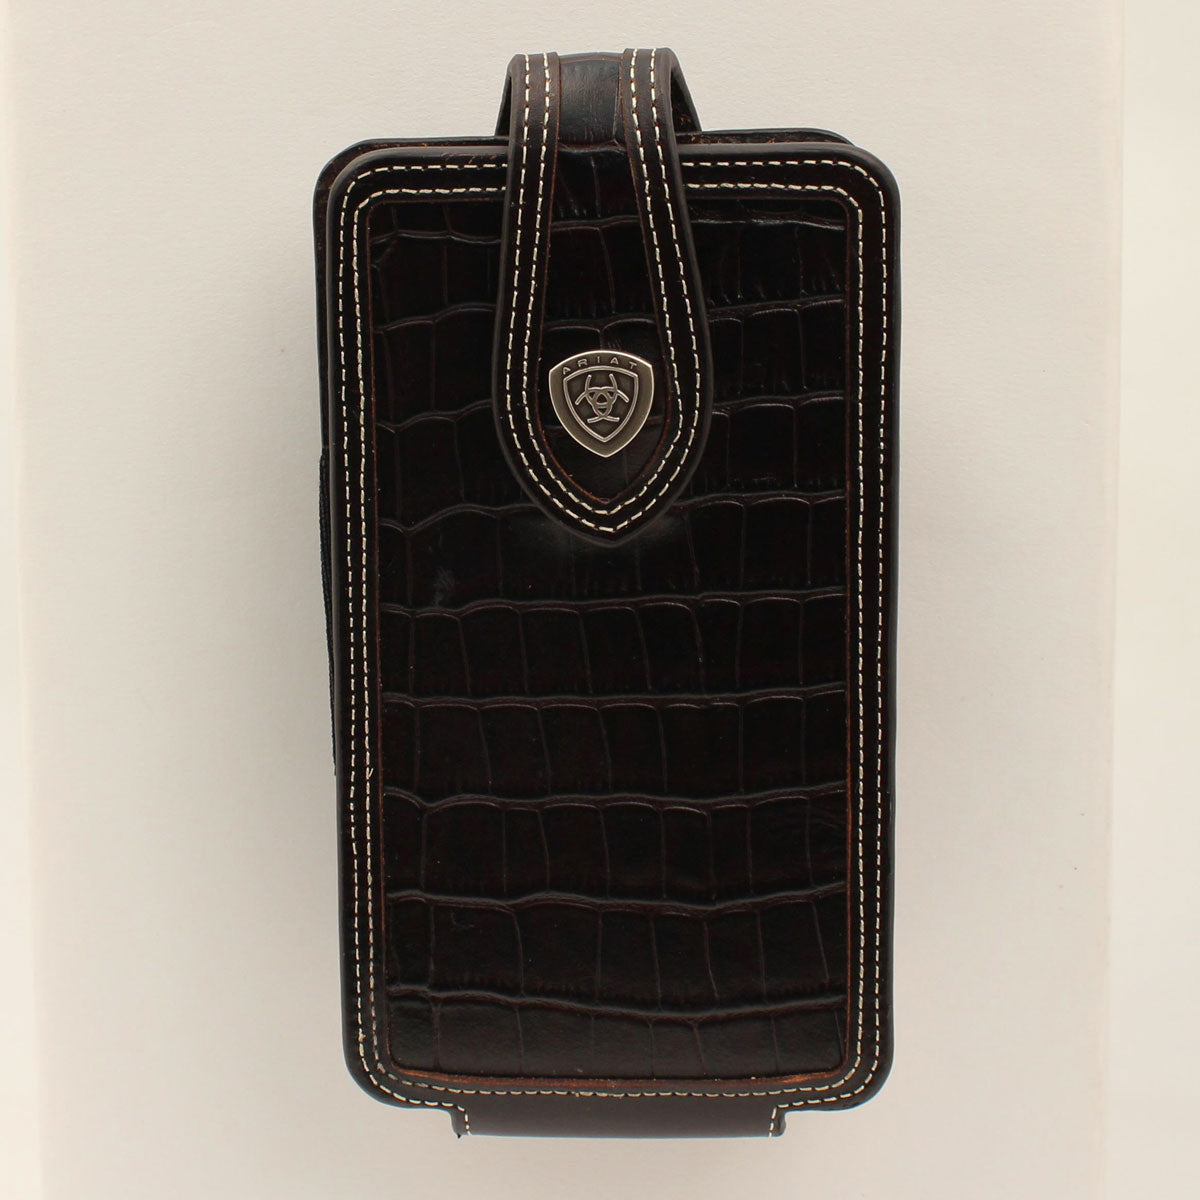 Ariat Imitation Caiman Cell Phone Case